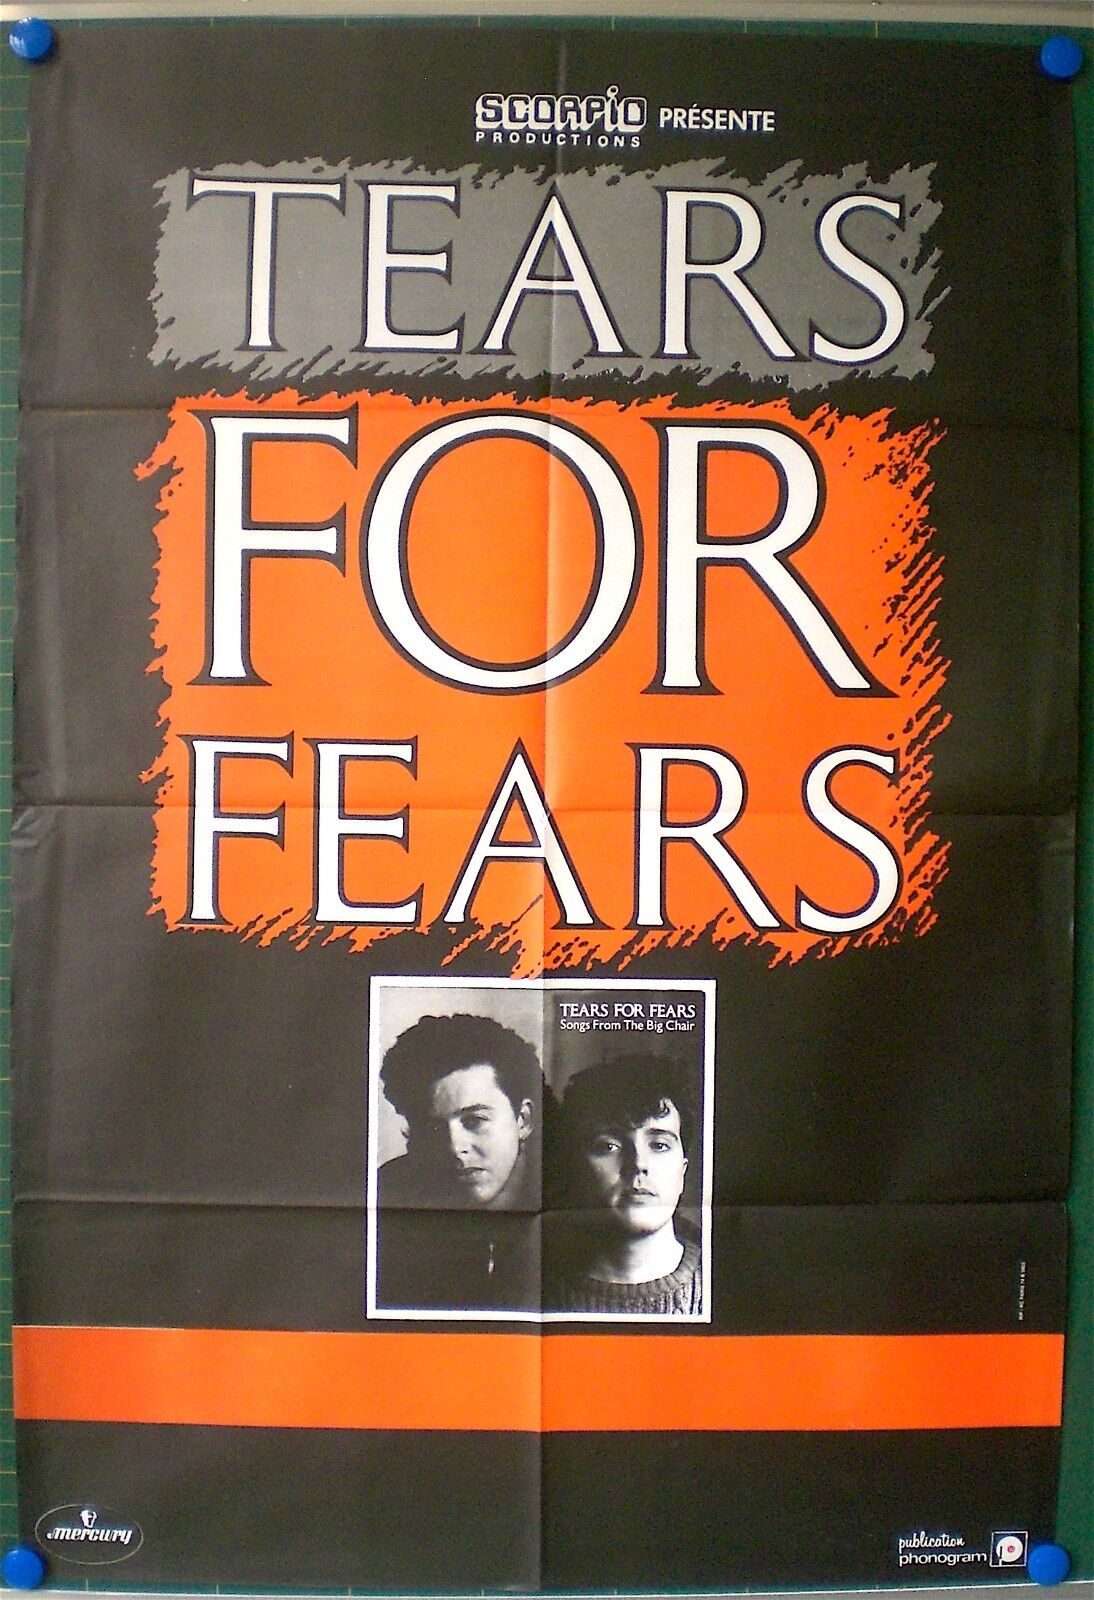 TEARS FOR FEARS - ORIGINAL POSTER - SONGS FROM THE BIG CHAIR - POSTER - 1985